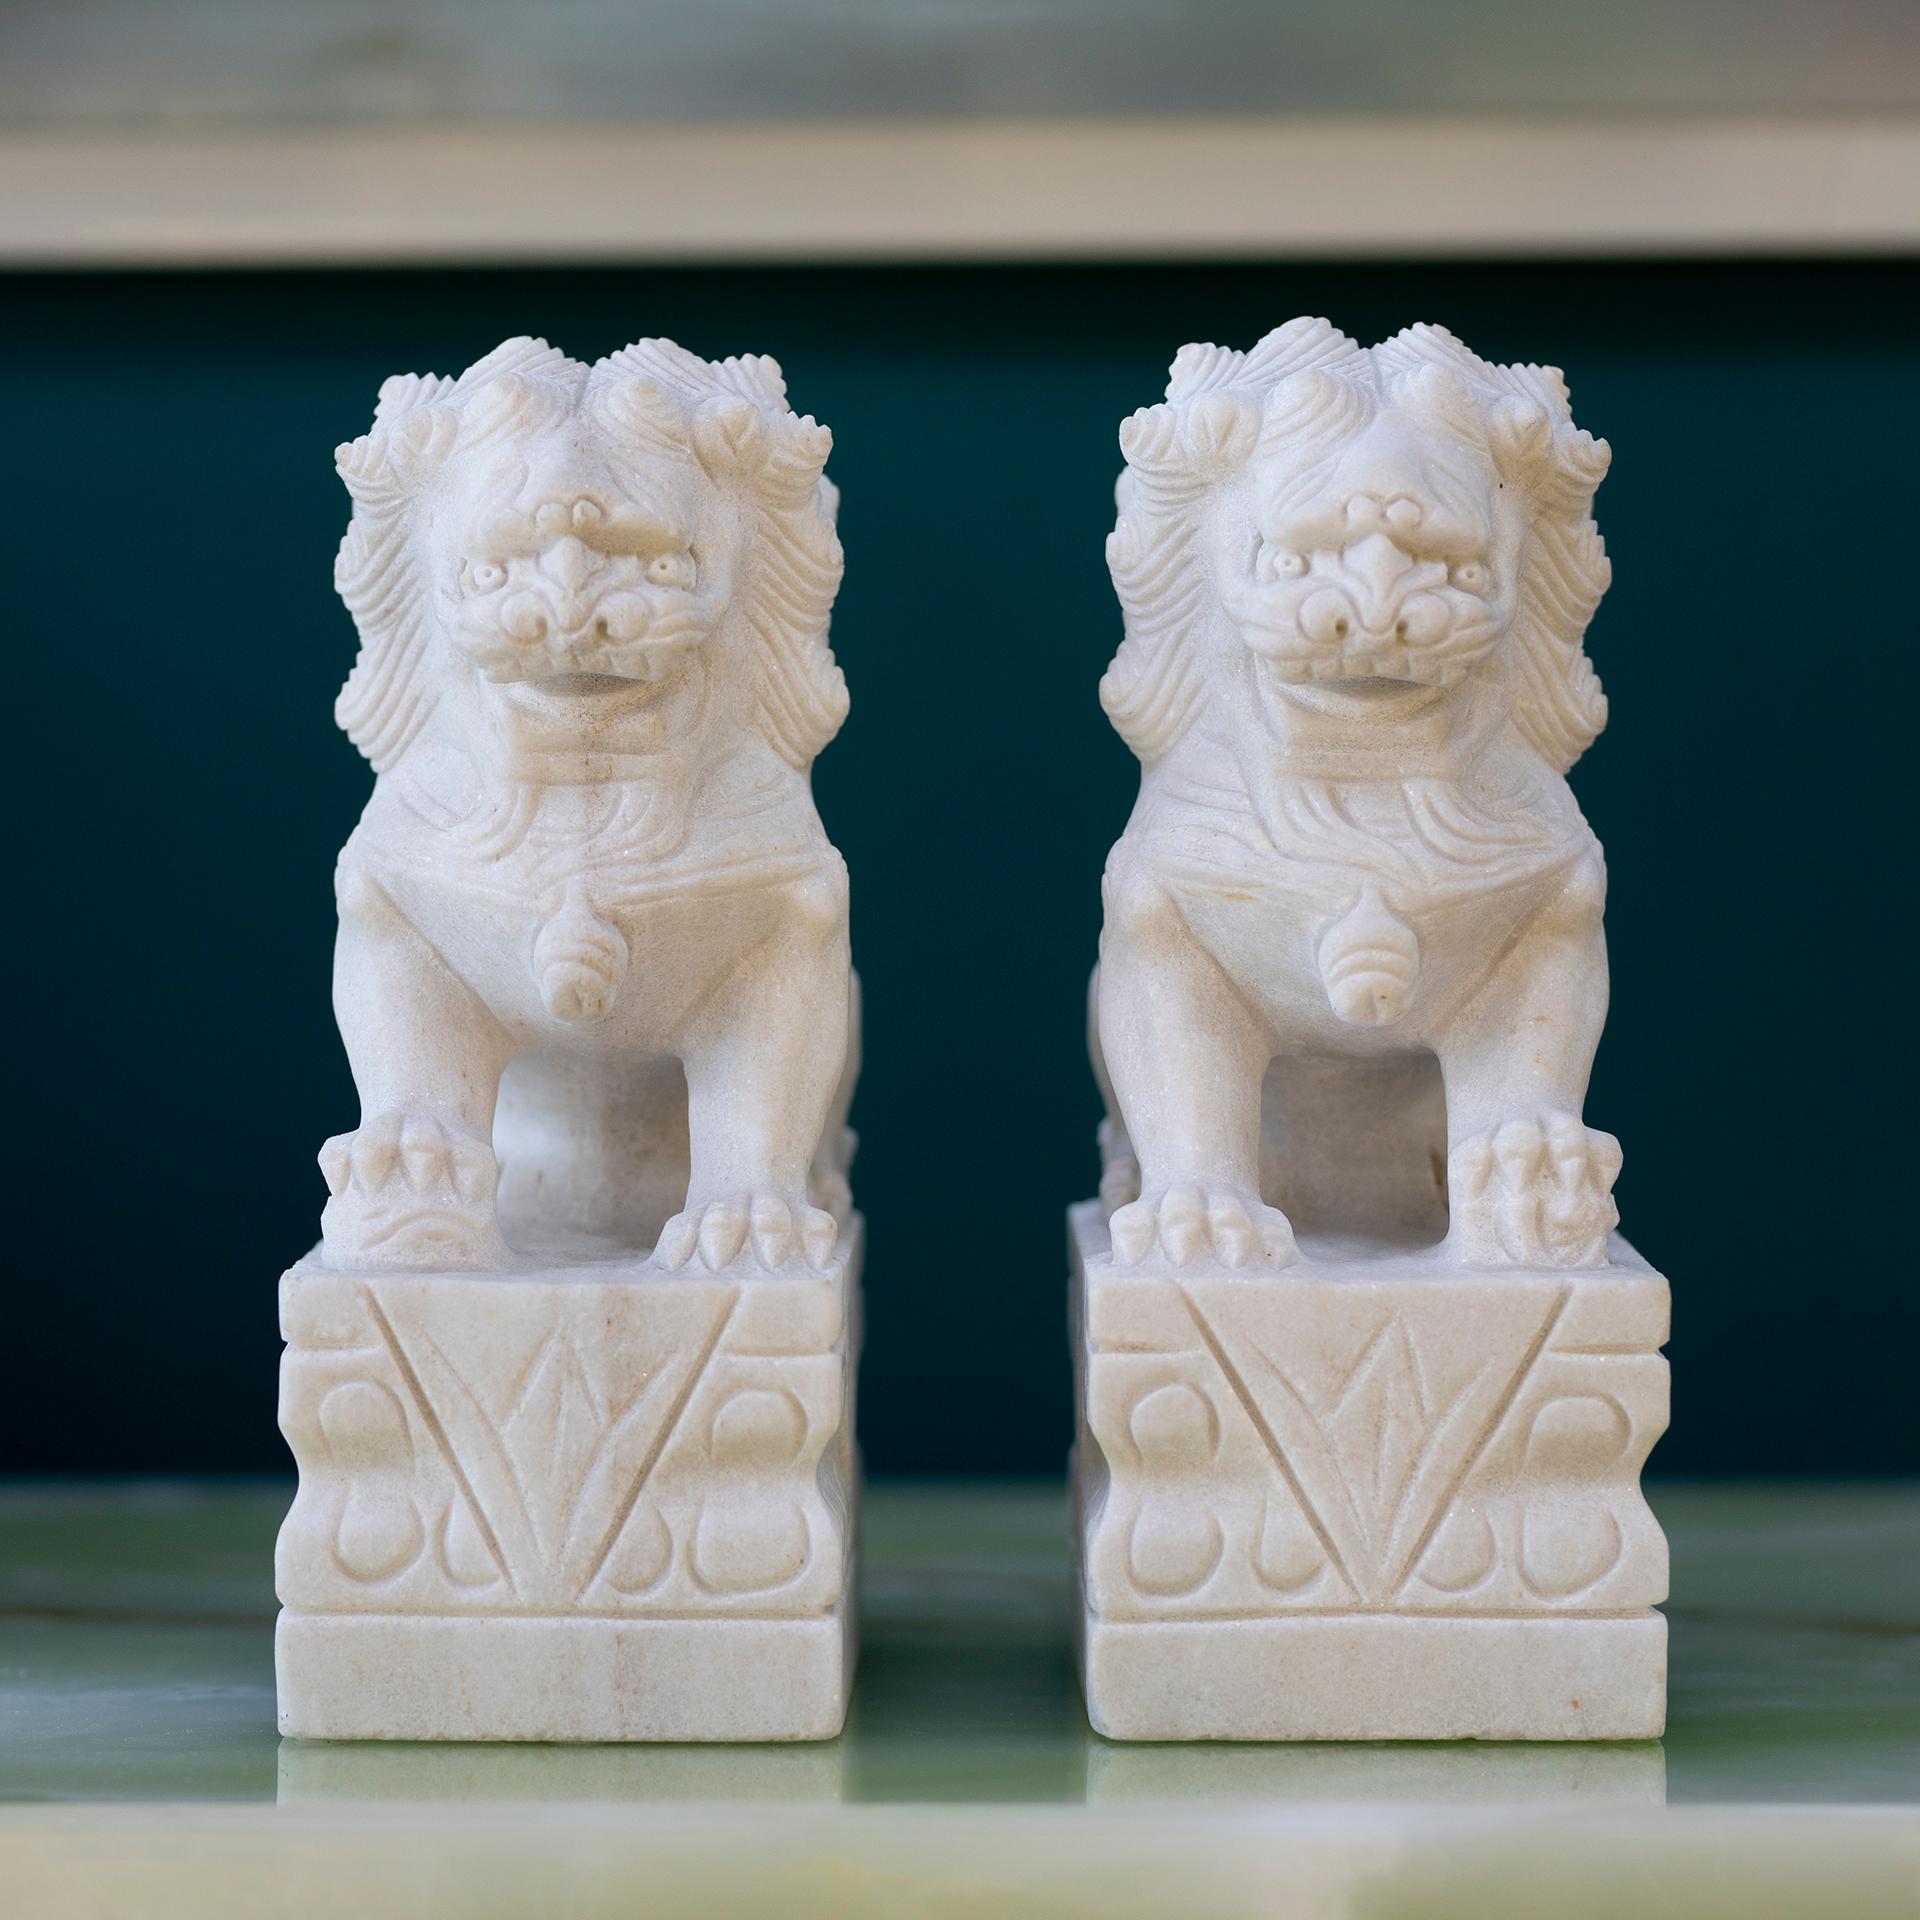 Set/2 Lions Guardian, Calacatta Bianco Marble, Lusitanus Home Collection by Lusitanus Home.

Handcrafted Guardian Lion sculptures in Calacatta Bianco Marble, making these pieces a unique addition to your home interior. A creative work from ancient